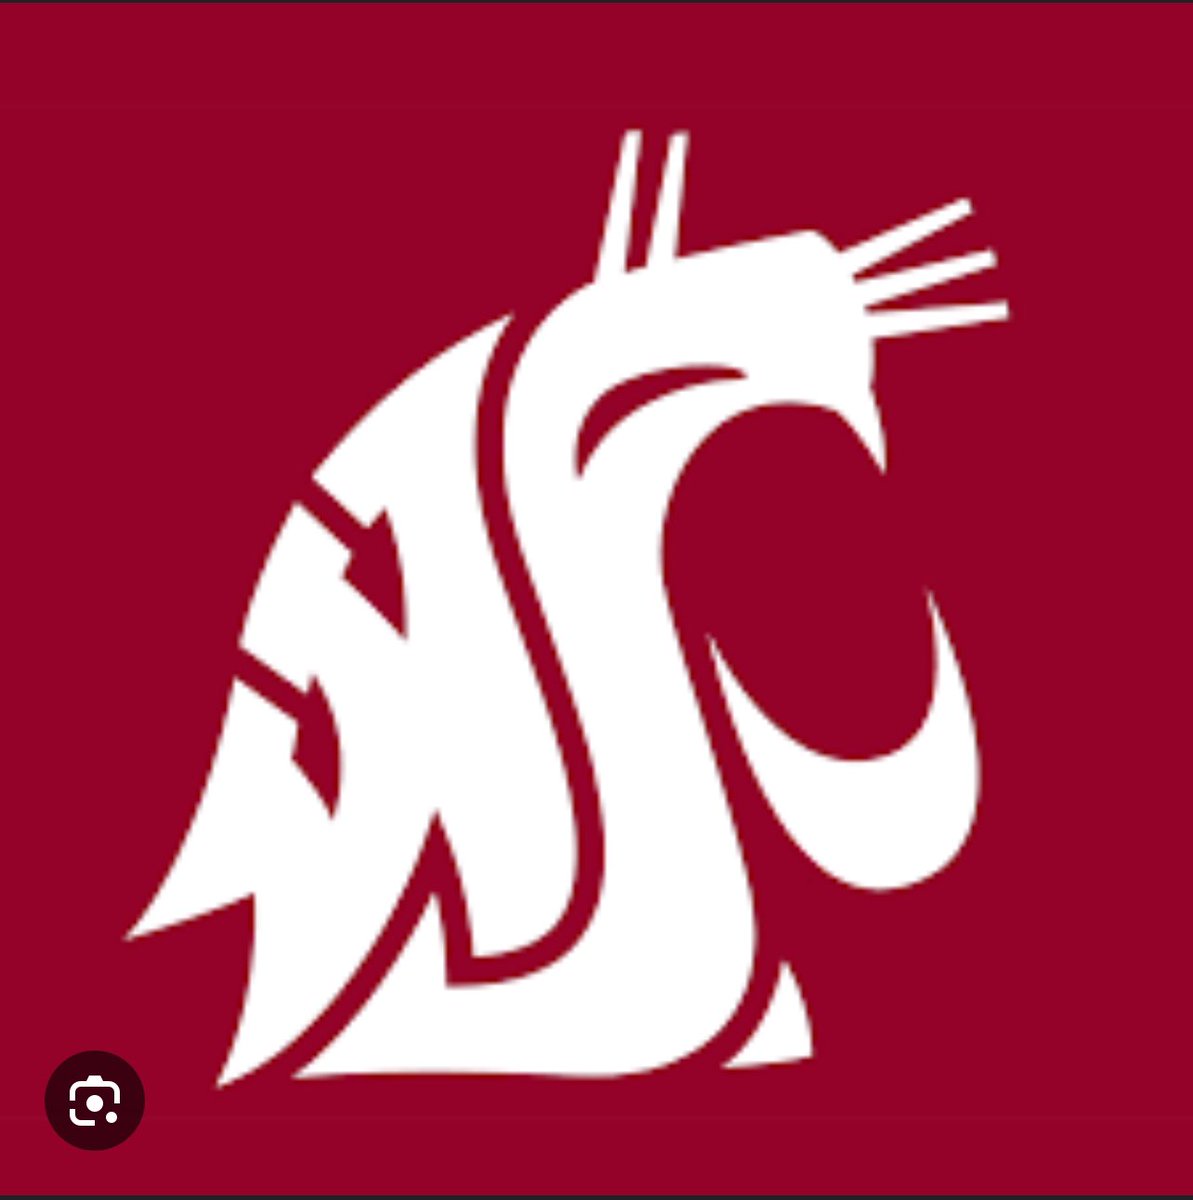 After a great conversation with @arbuckle_ben I’m blessed to receive an official D1 scholarship from @WSUCougarFB!!